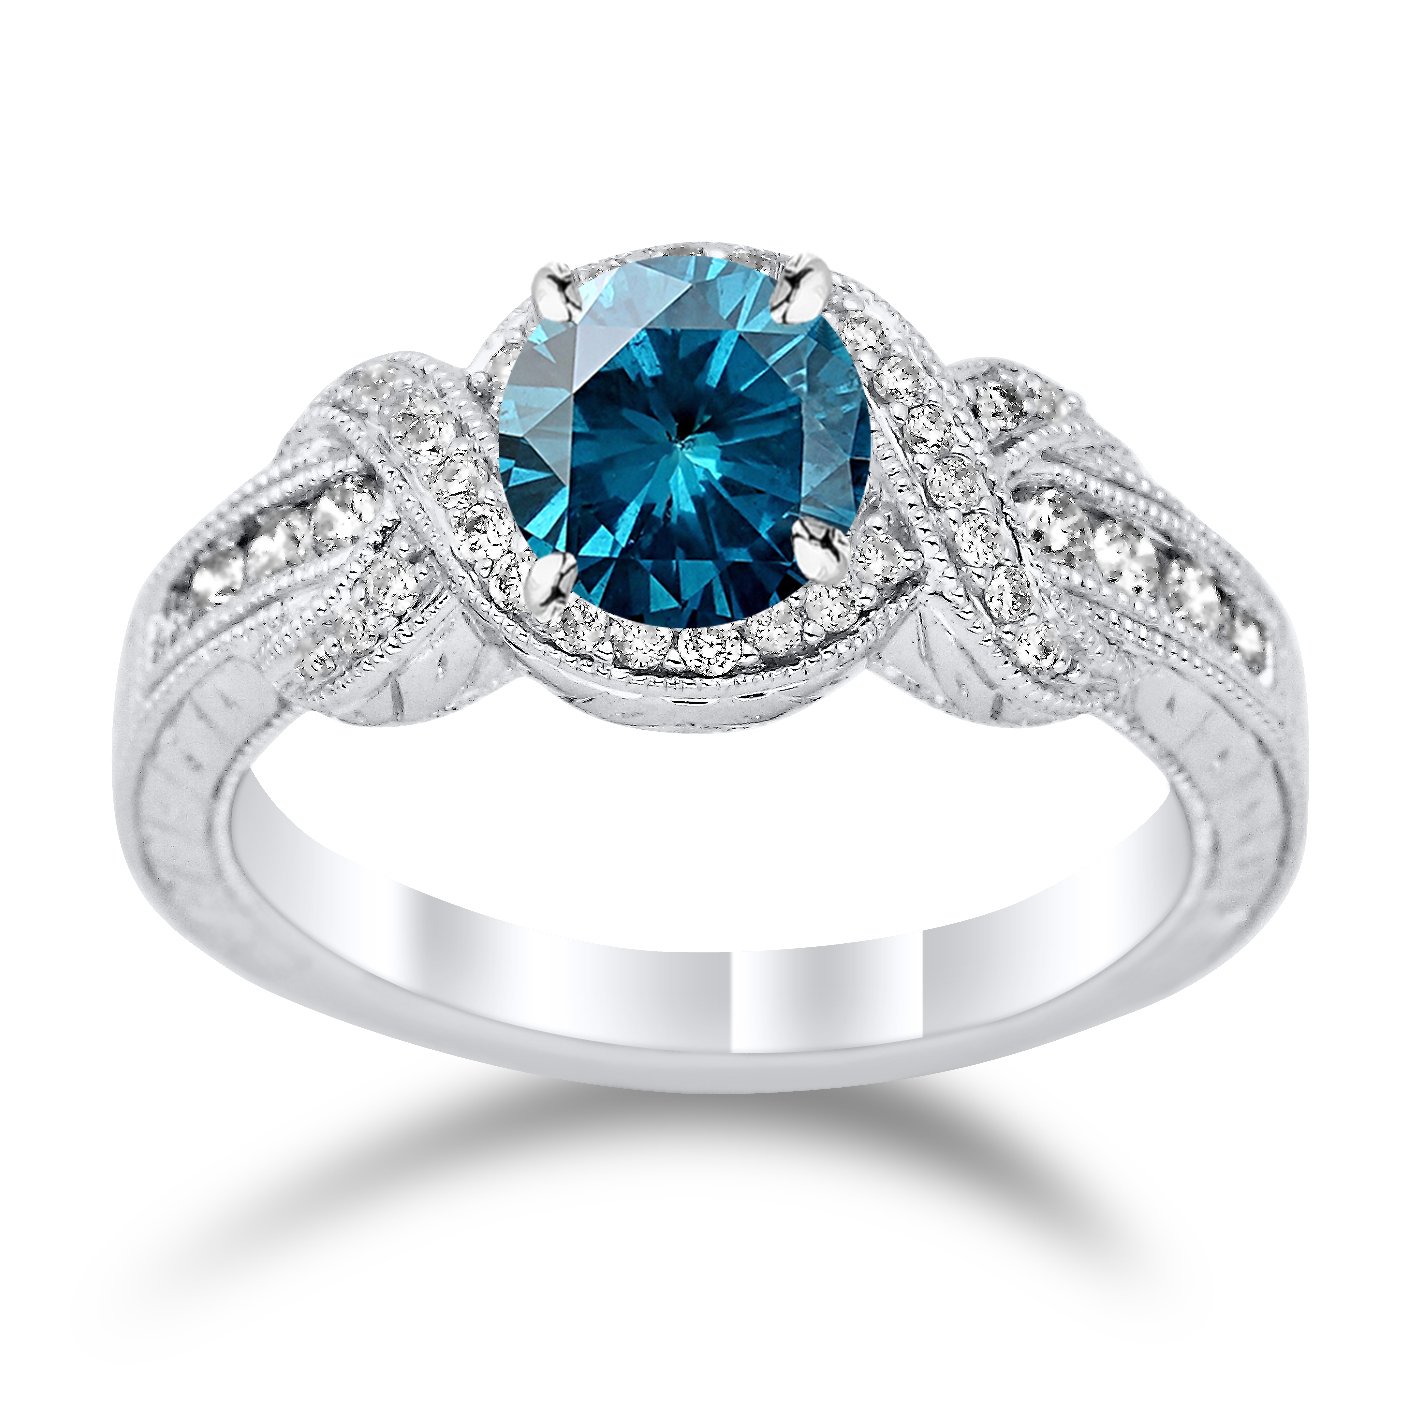 Twisting Channel Set Knot Diamond Engagement Ring with a 1 Carat Blue Diamond Heirloom Quality Center